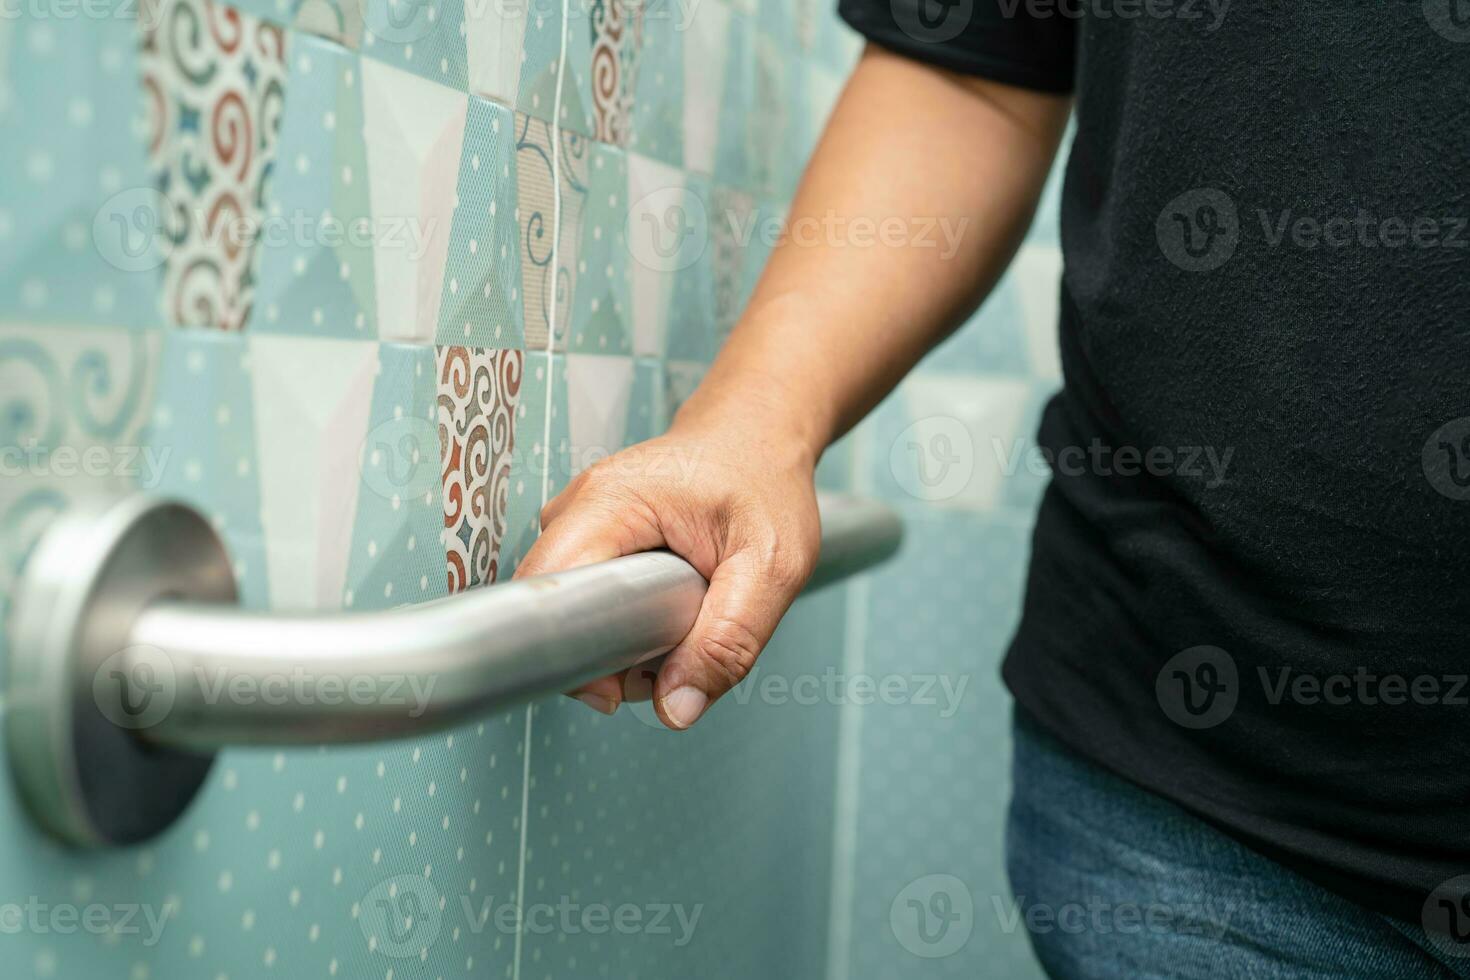 Asian elderly woman use bathroom handle security in toilet, healthy strong medical concept. photo